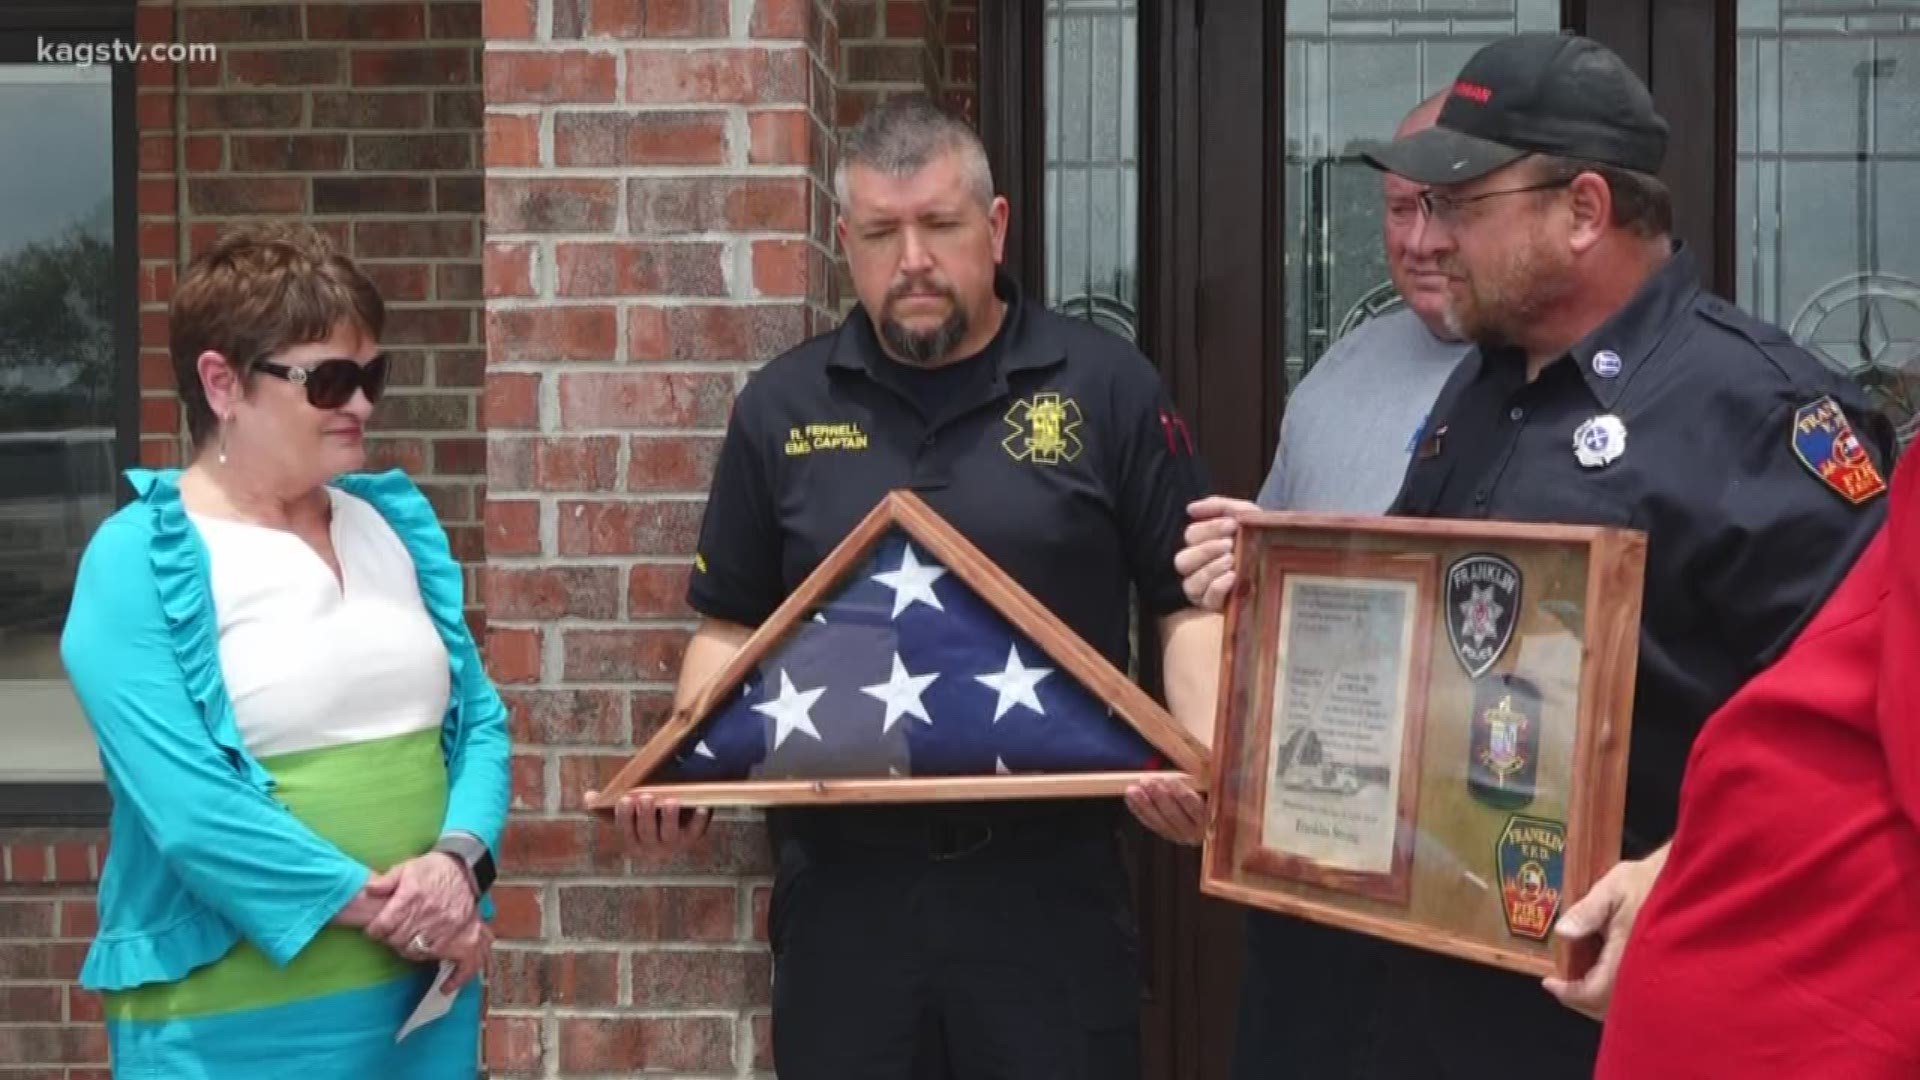 The flag was gifted to the SouthStar Bank, as debris continued to be picked up. Officials say the debris of the 55 buildings destroyed has been entirely placed on empty lots.